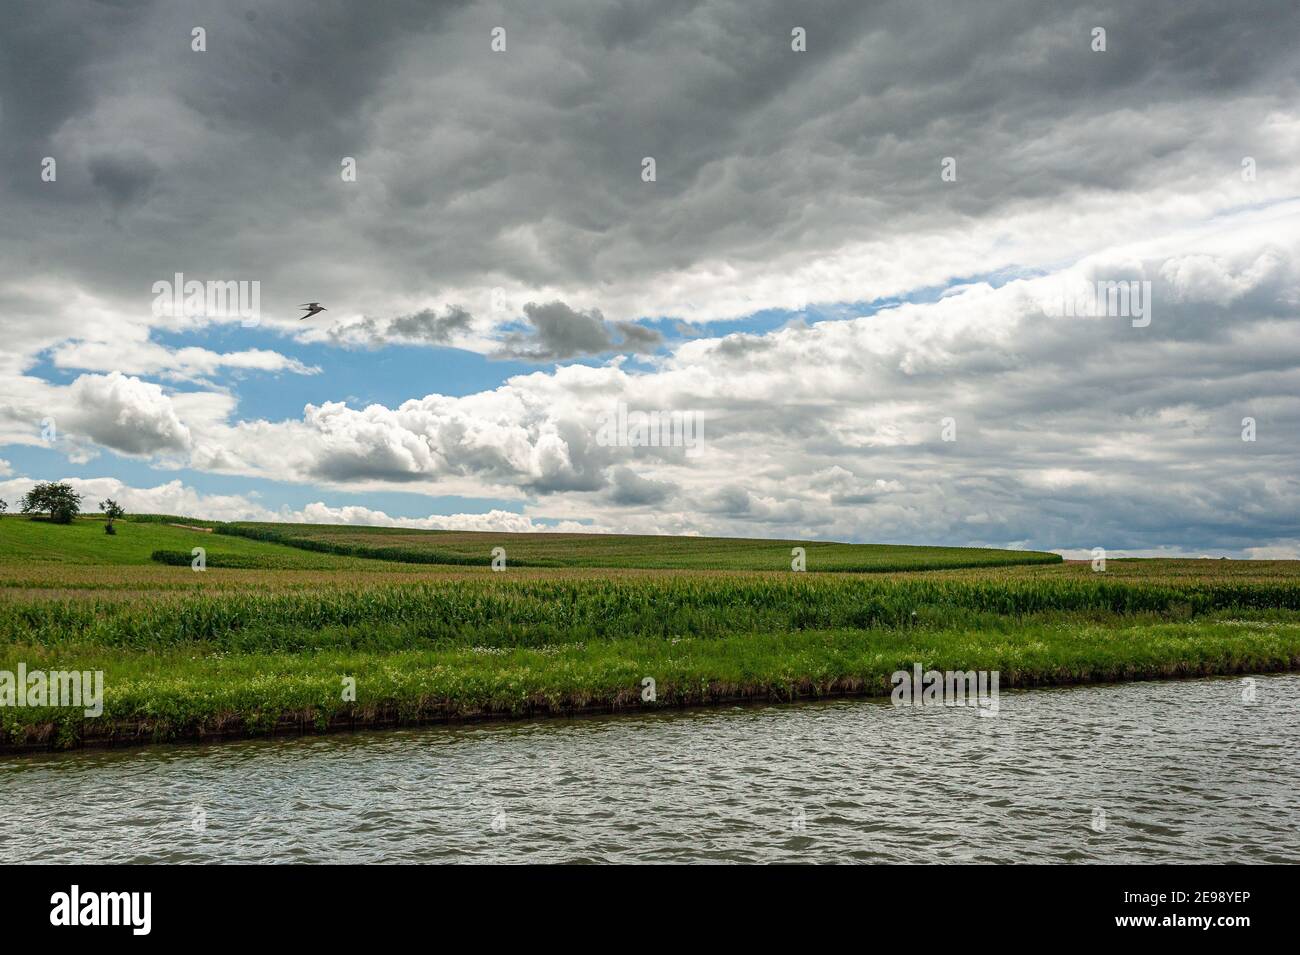 Cloudy sky over the canal in northeastern France. - A heavy cloud obscures the sky above the canal. A bird crosses the sky above the green fields. Stock Photo